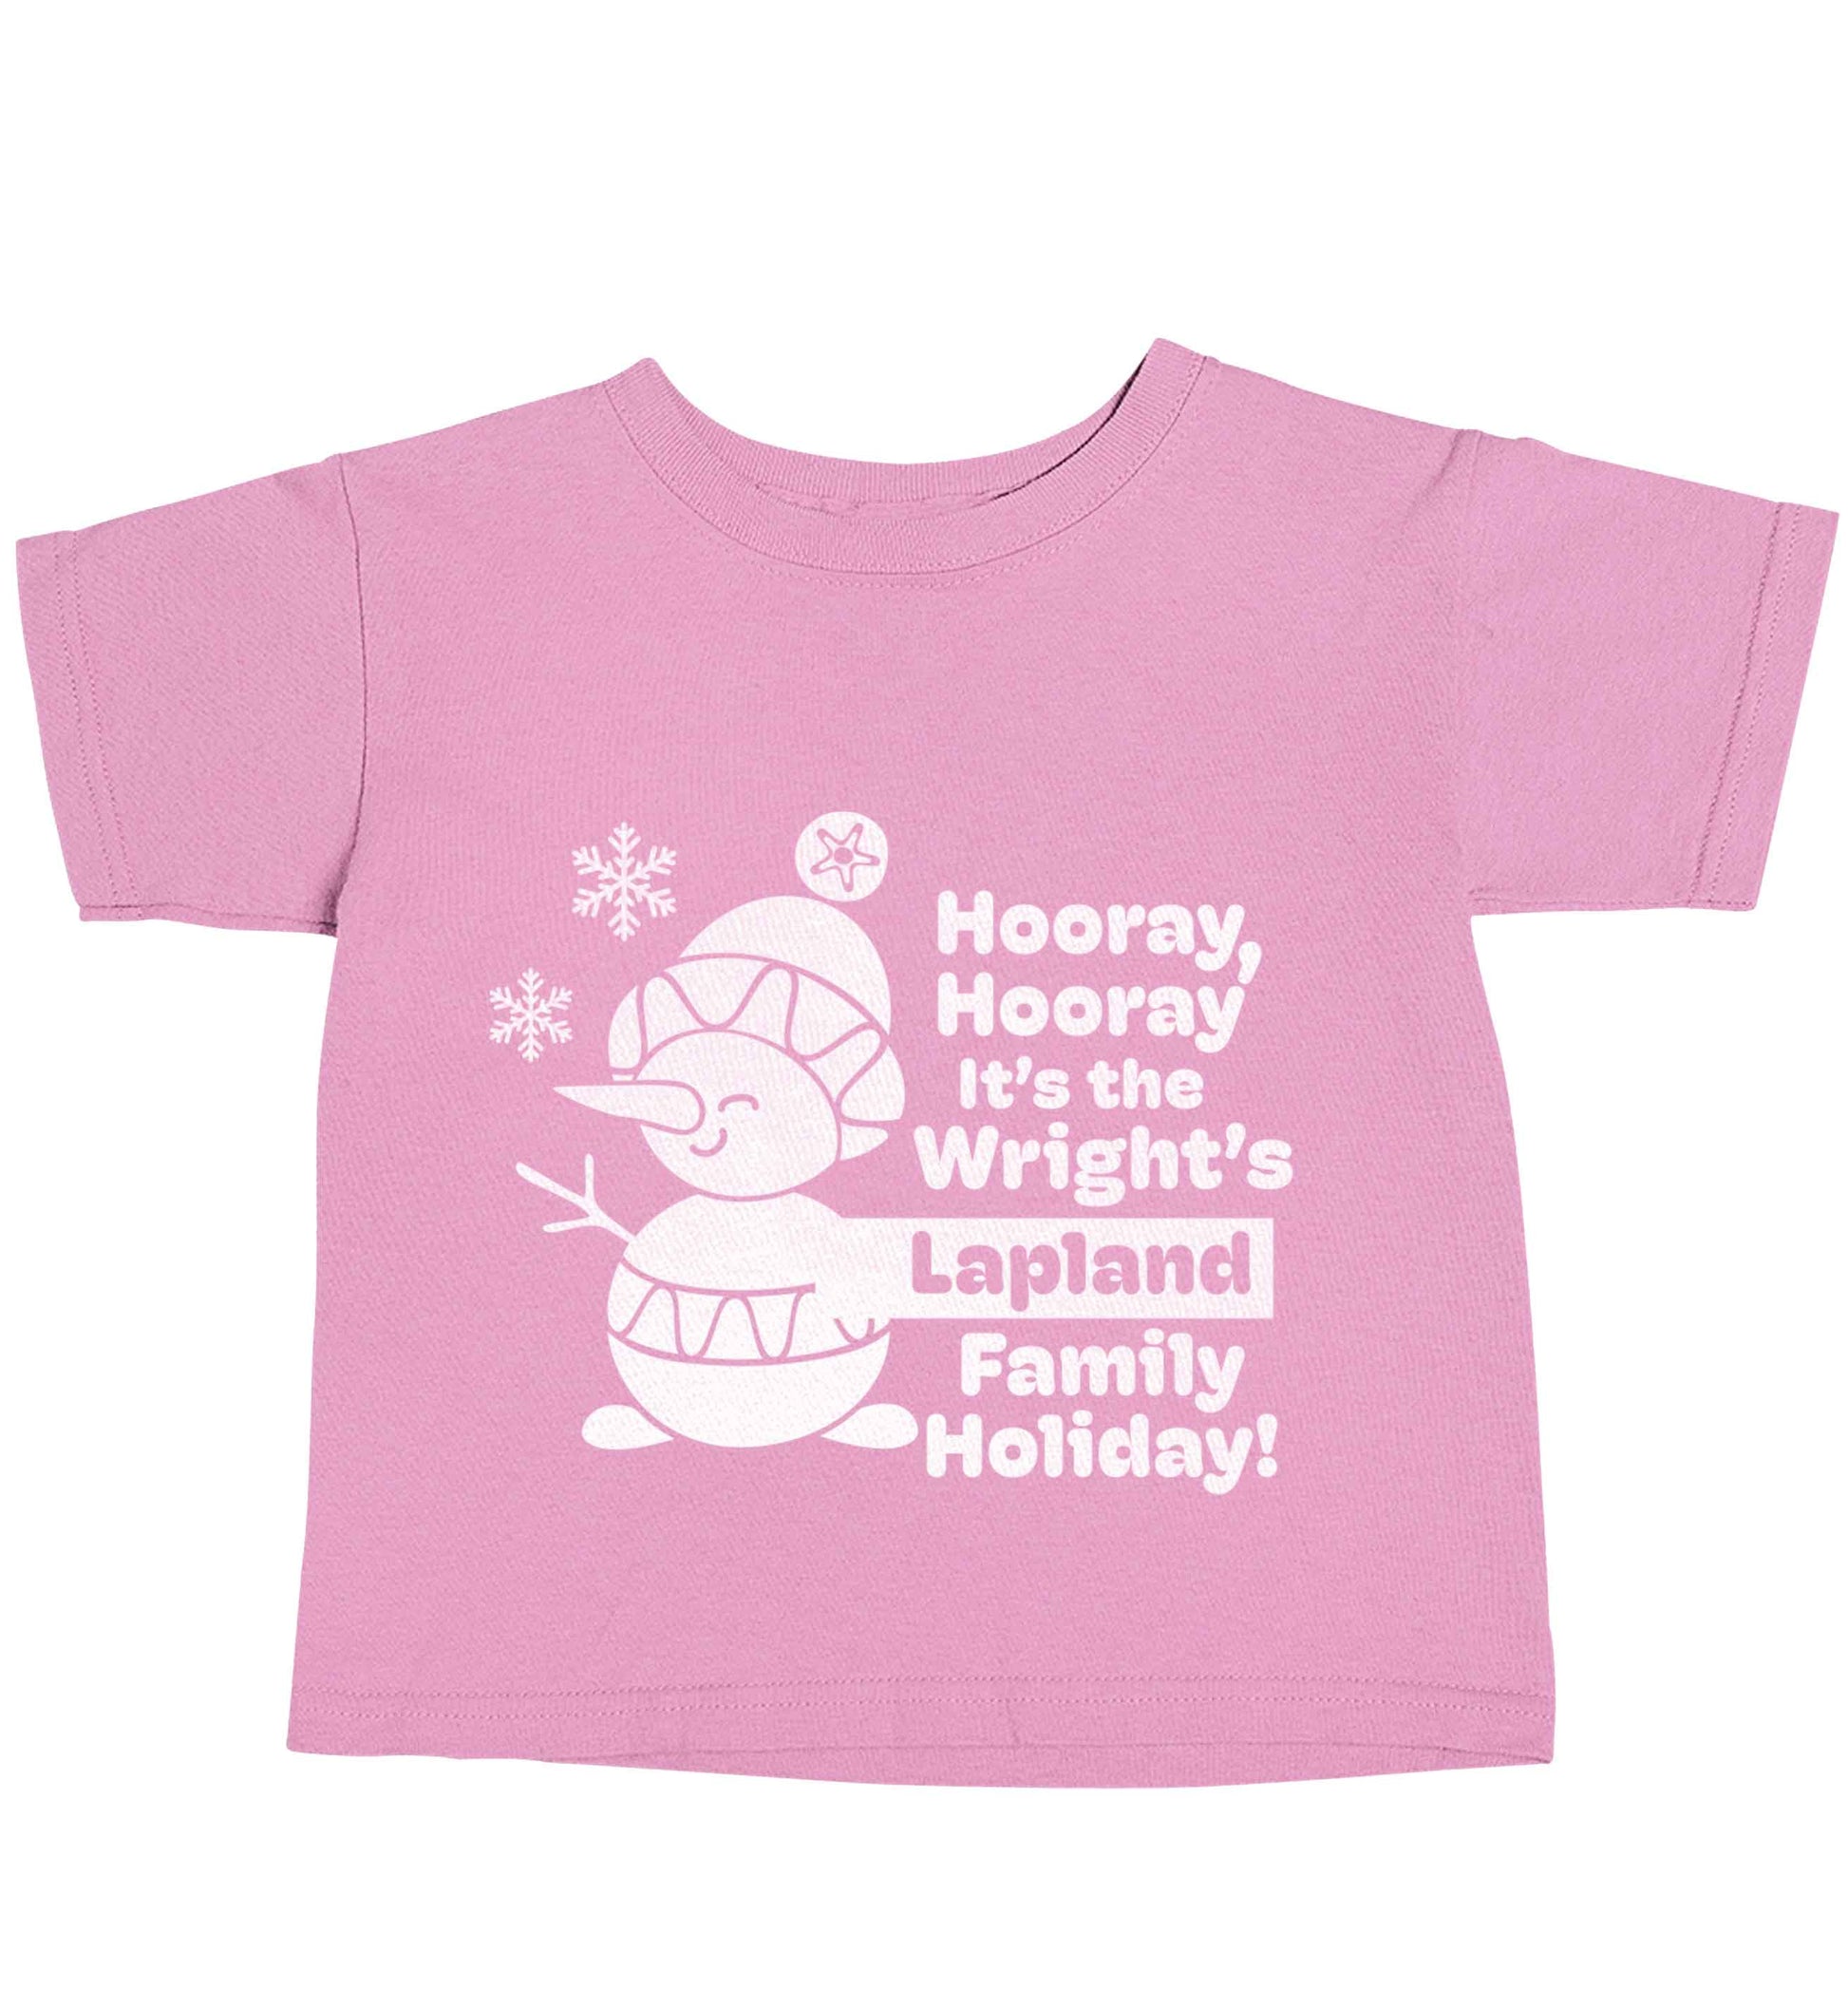 Hooray it's the personalised Lapland holiday! light pink baby toddler Tshirt 2 Years